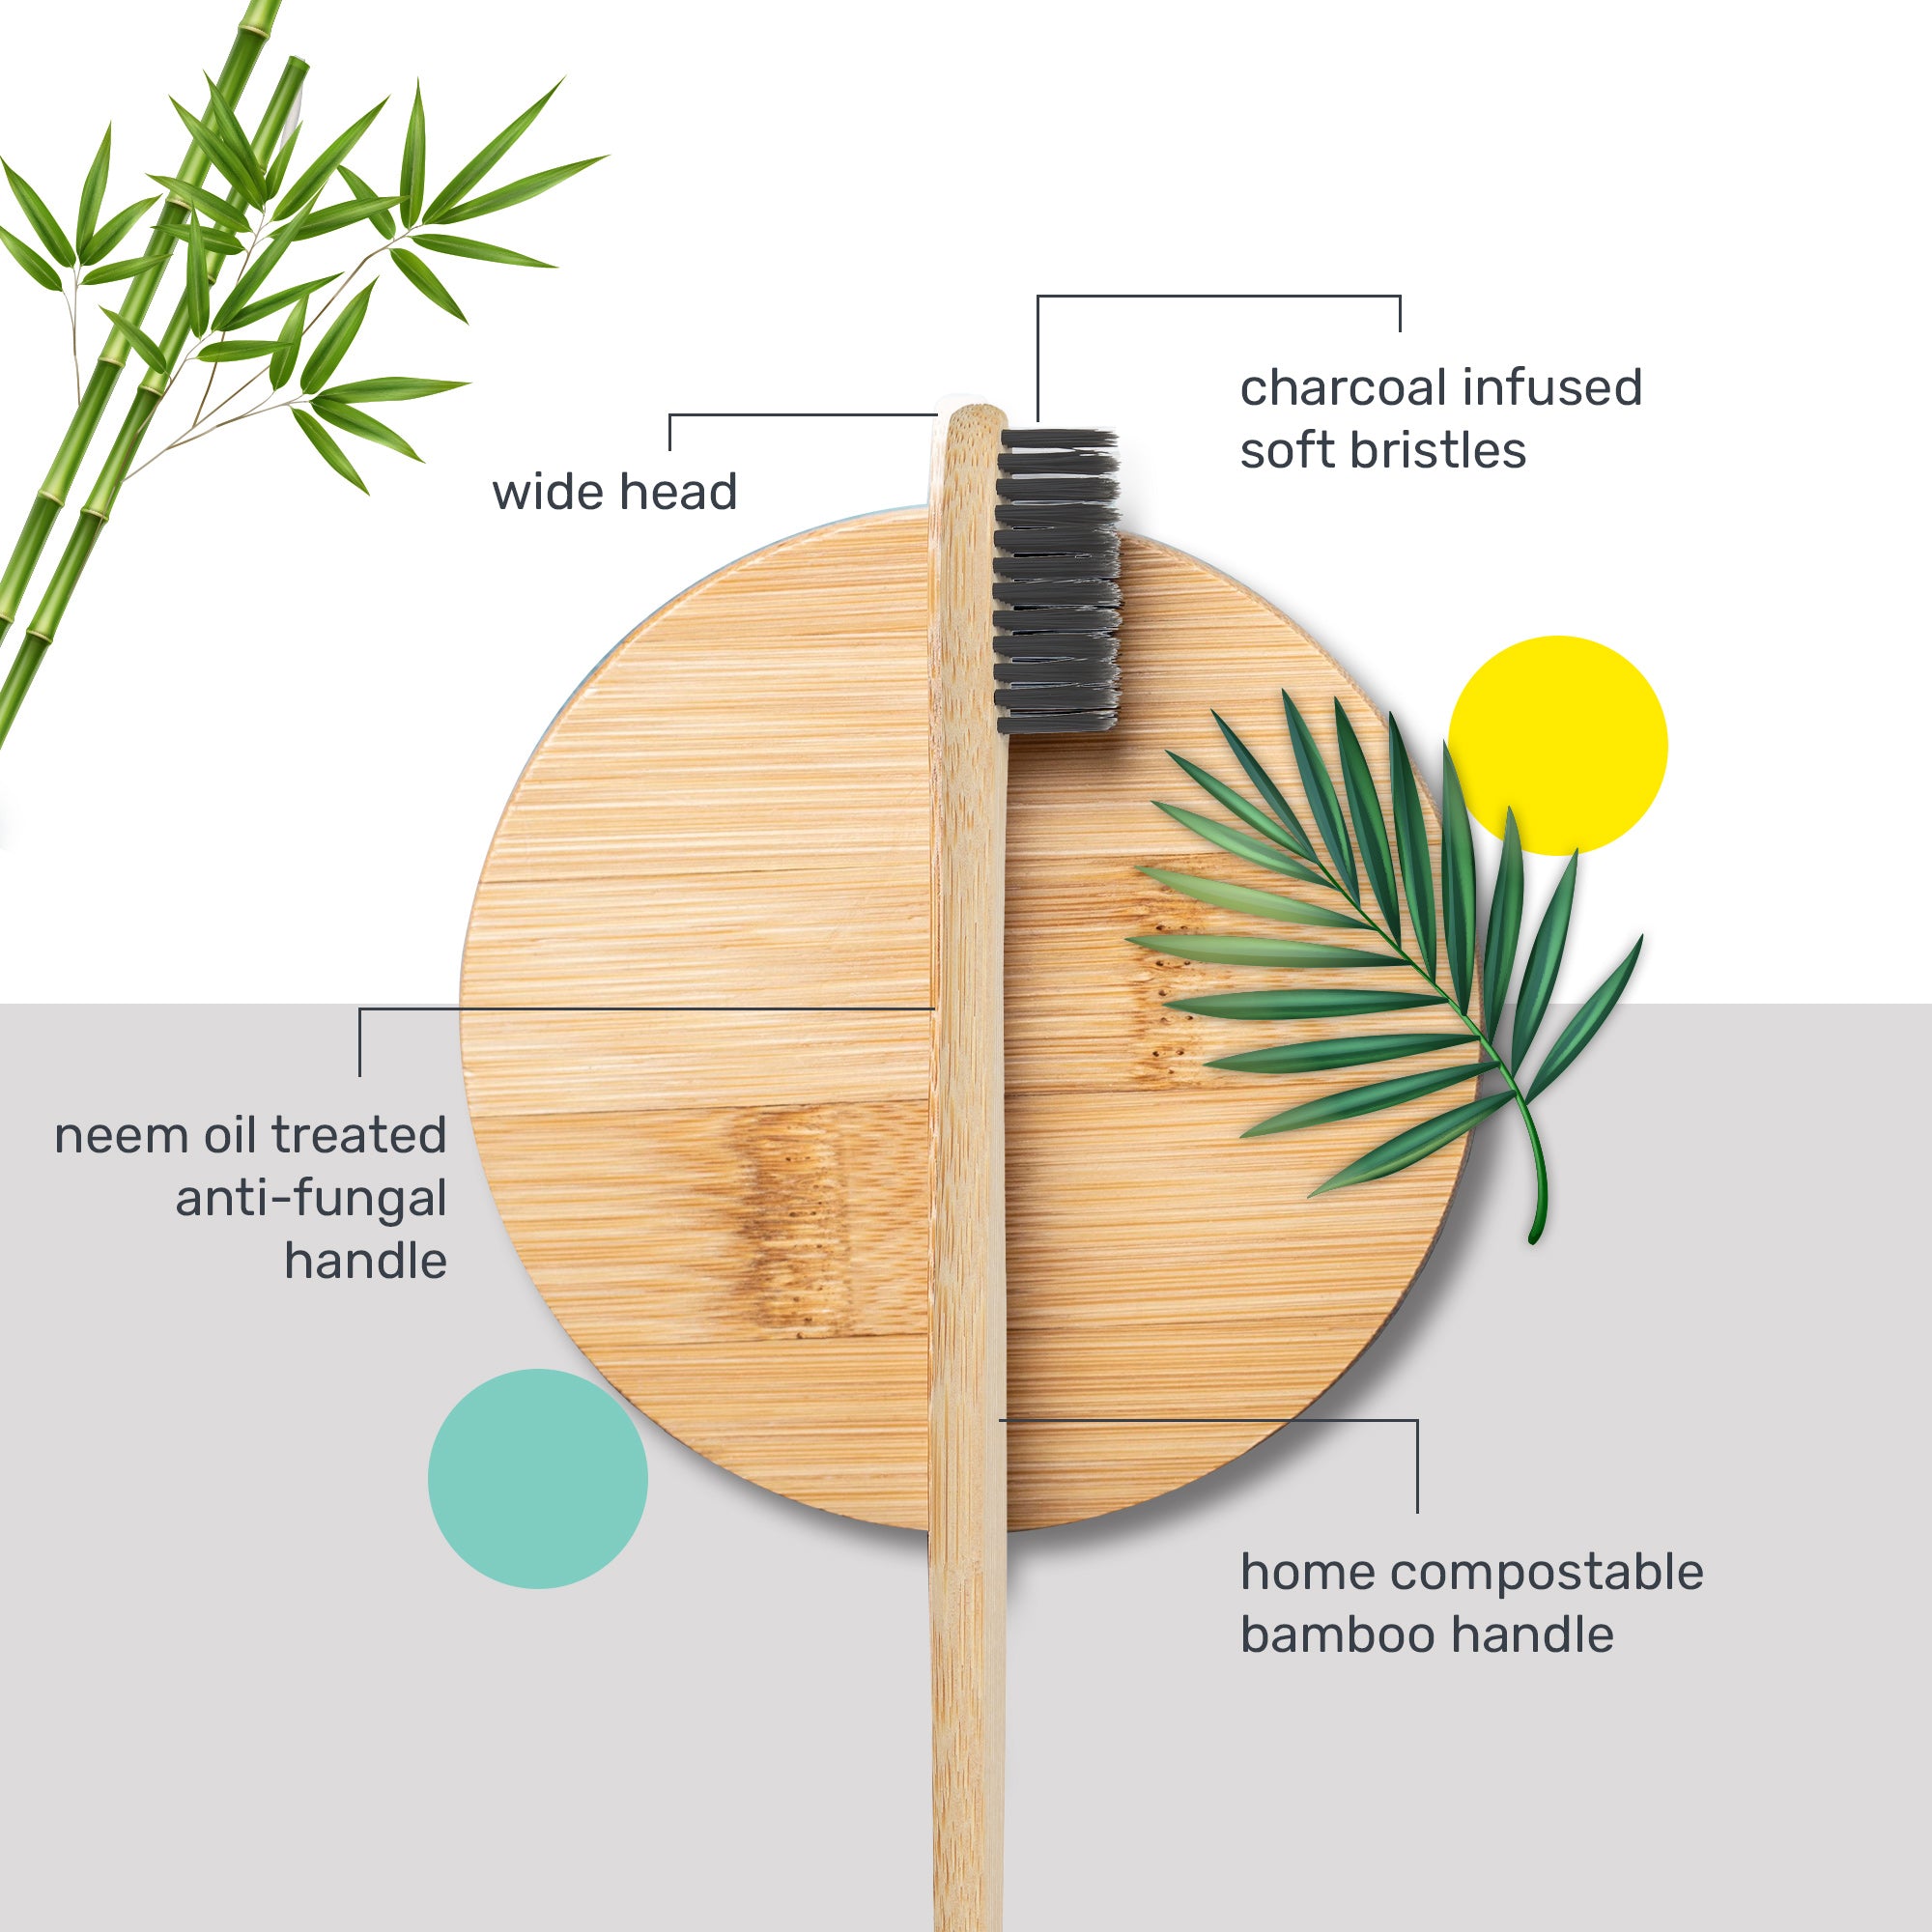 Charcoal coated bristles, neem oil coated bamboo toothbrush